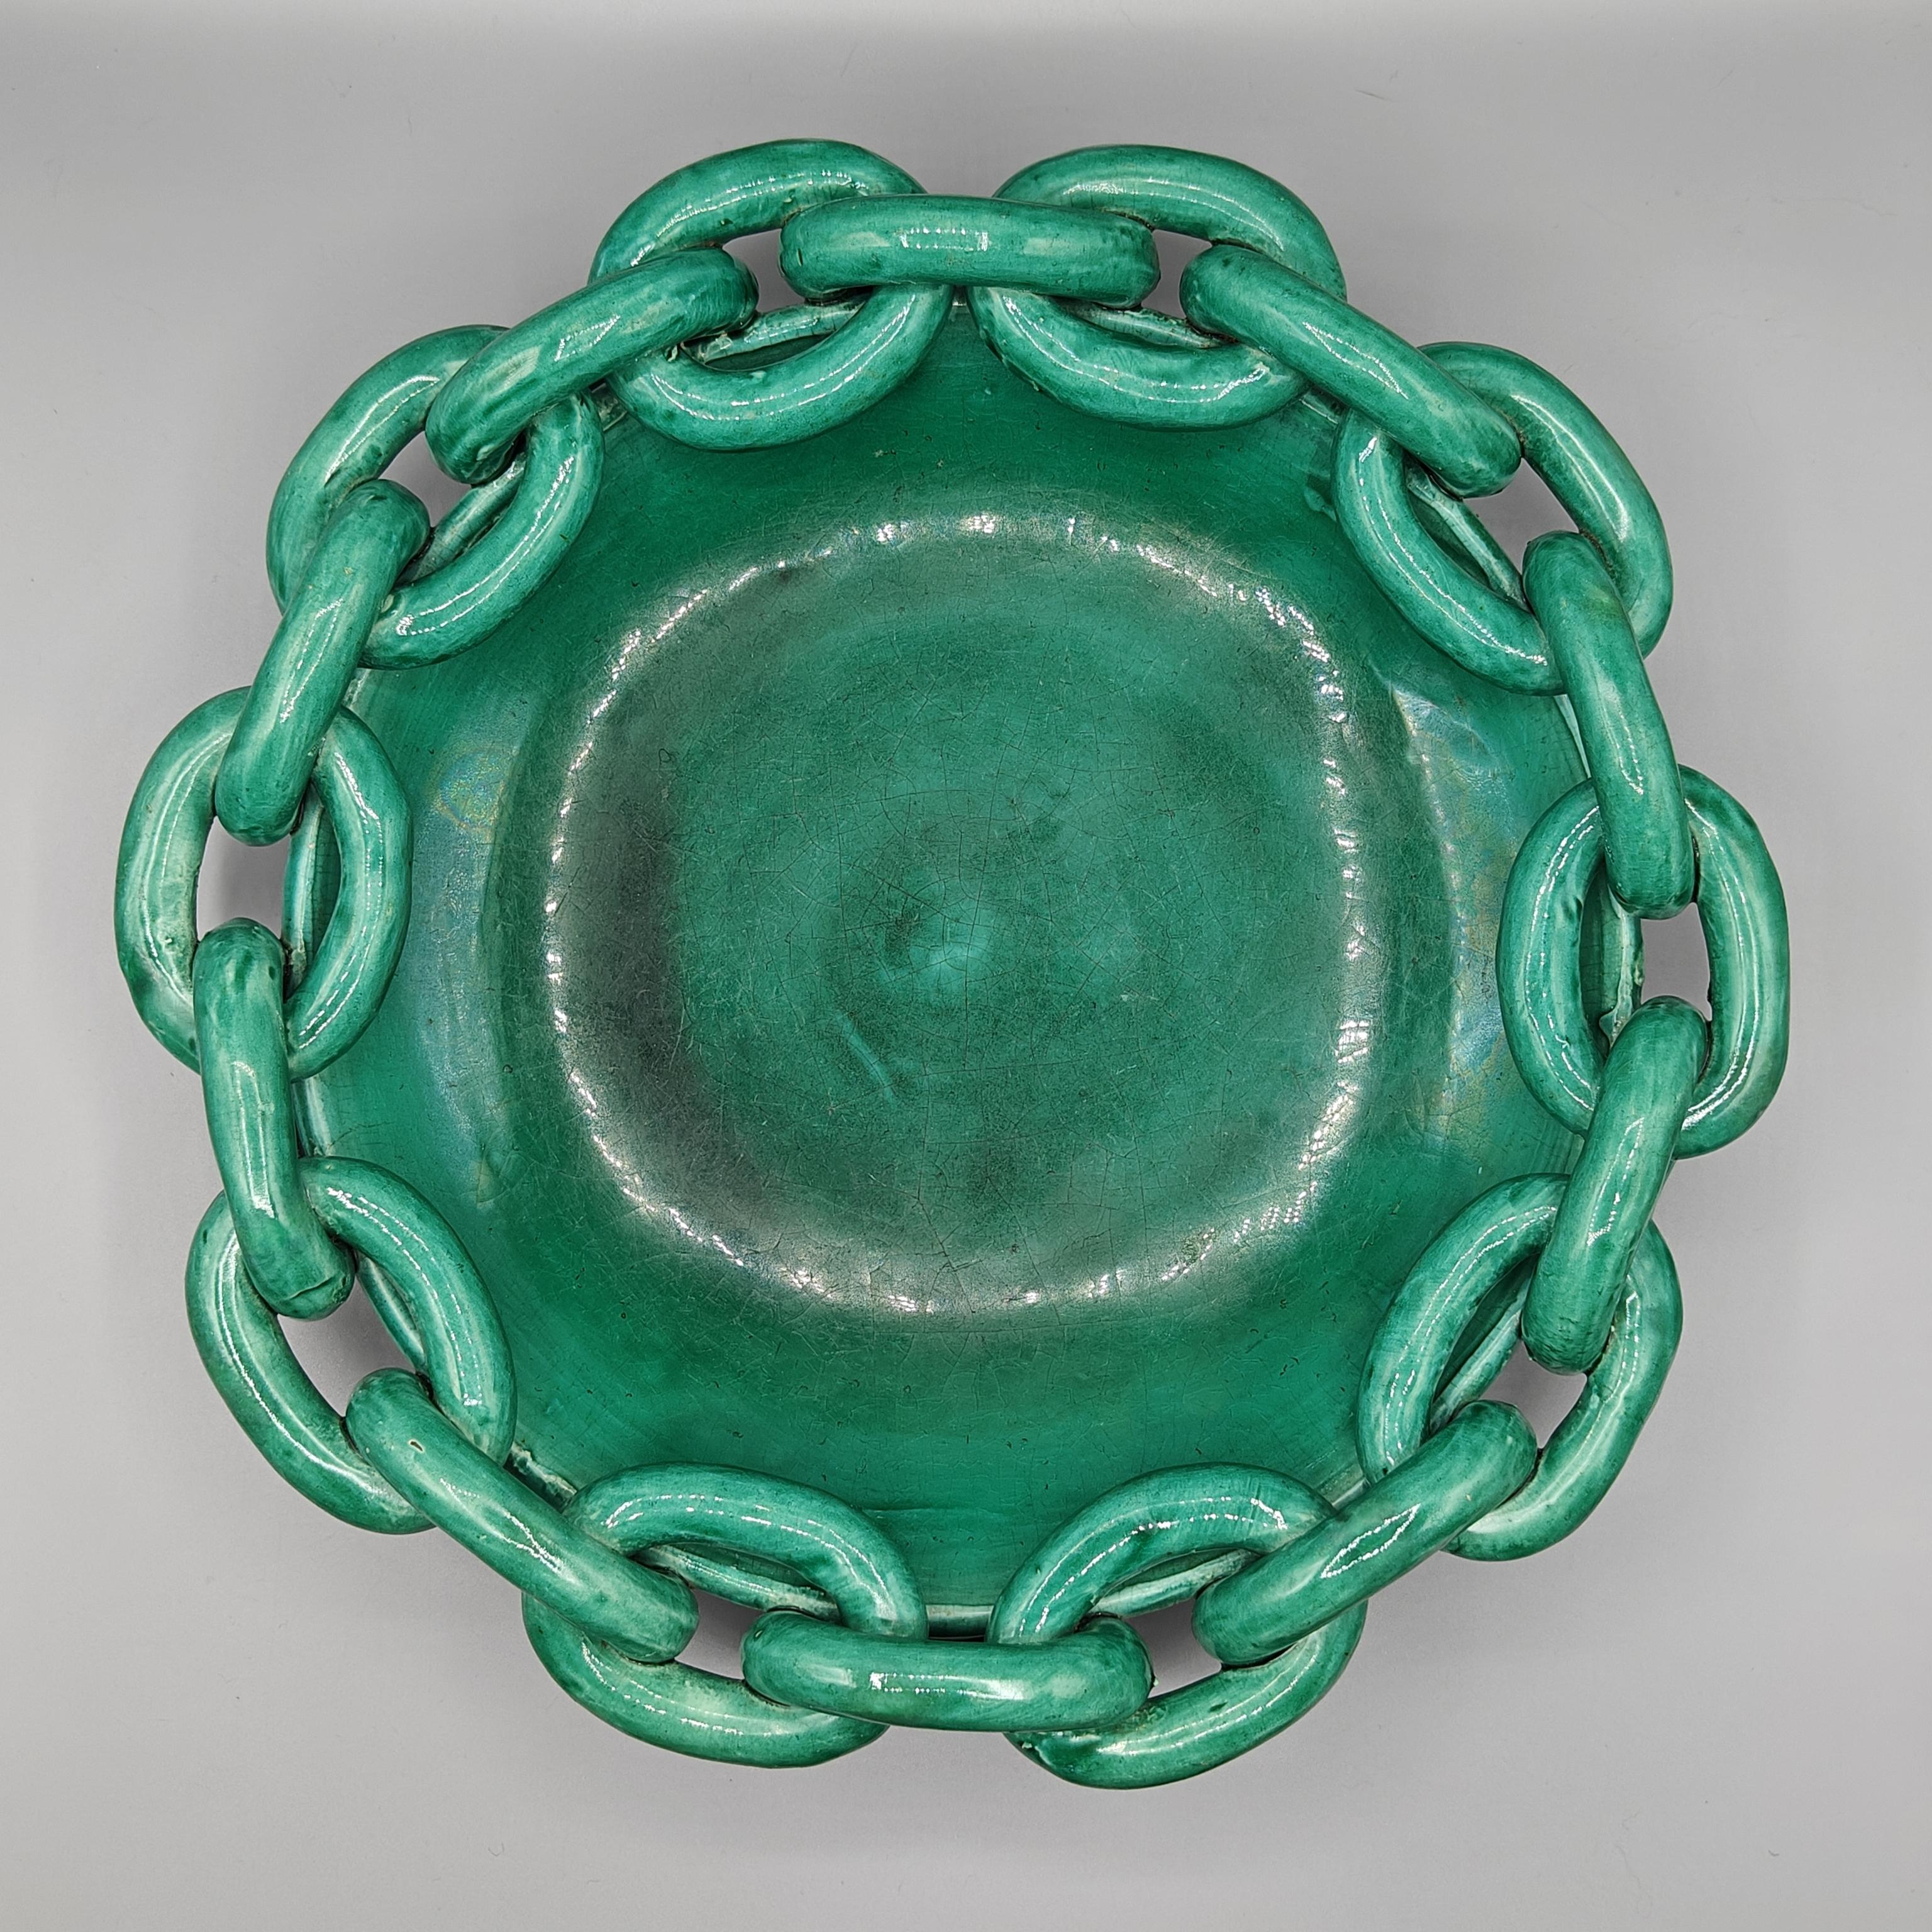 Enameled Important green ceramic bowl from Vallauris